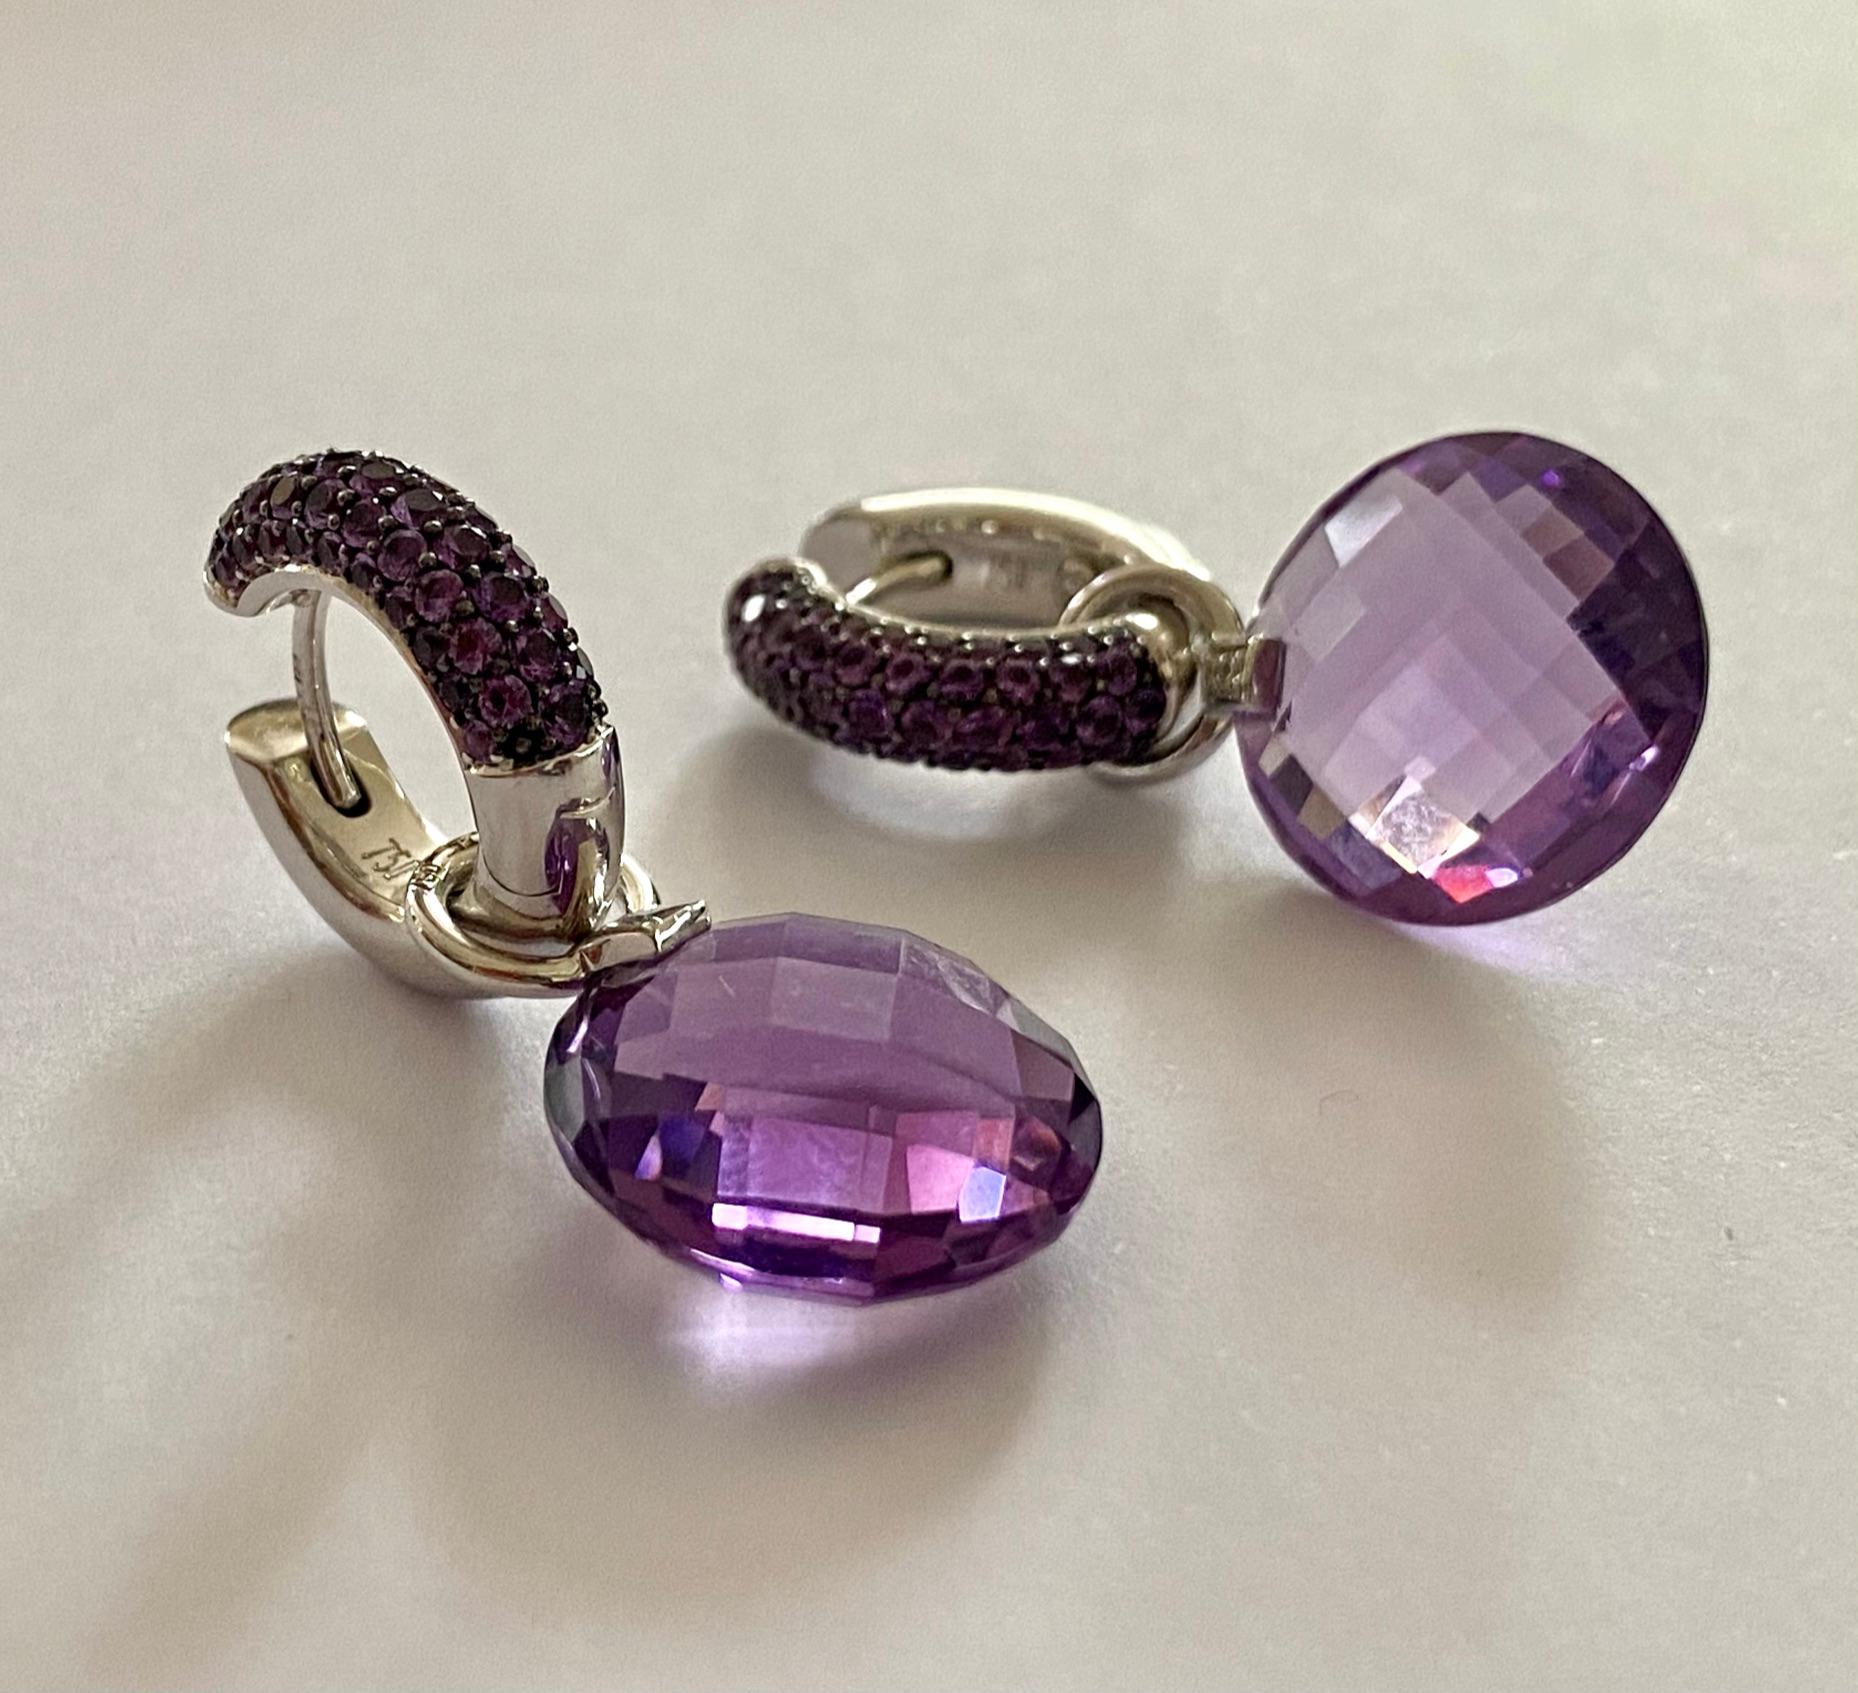 One  pair of 18 Karat white gold earrings, set with two checkered cut natural Amethyst ceneter stone and 102 round mixed cut natuaral Amethyst and six  round brilliant cut natural diamonds on the sides
Total Amethyst weight: 21.15 ct.
Total Diamonds